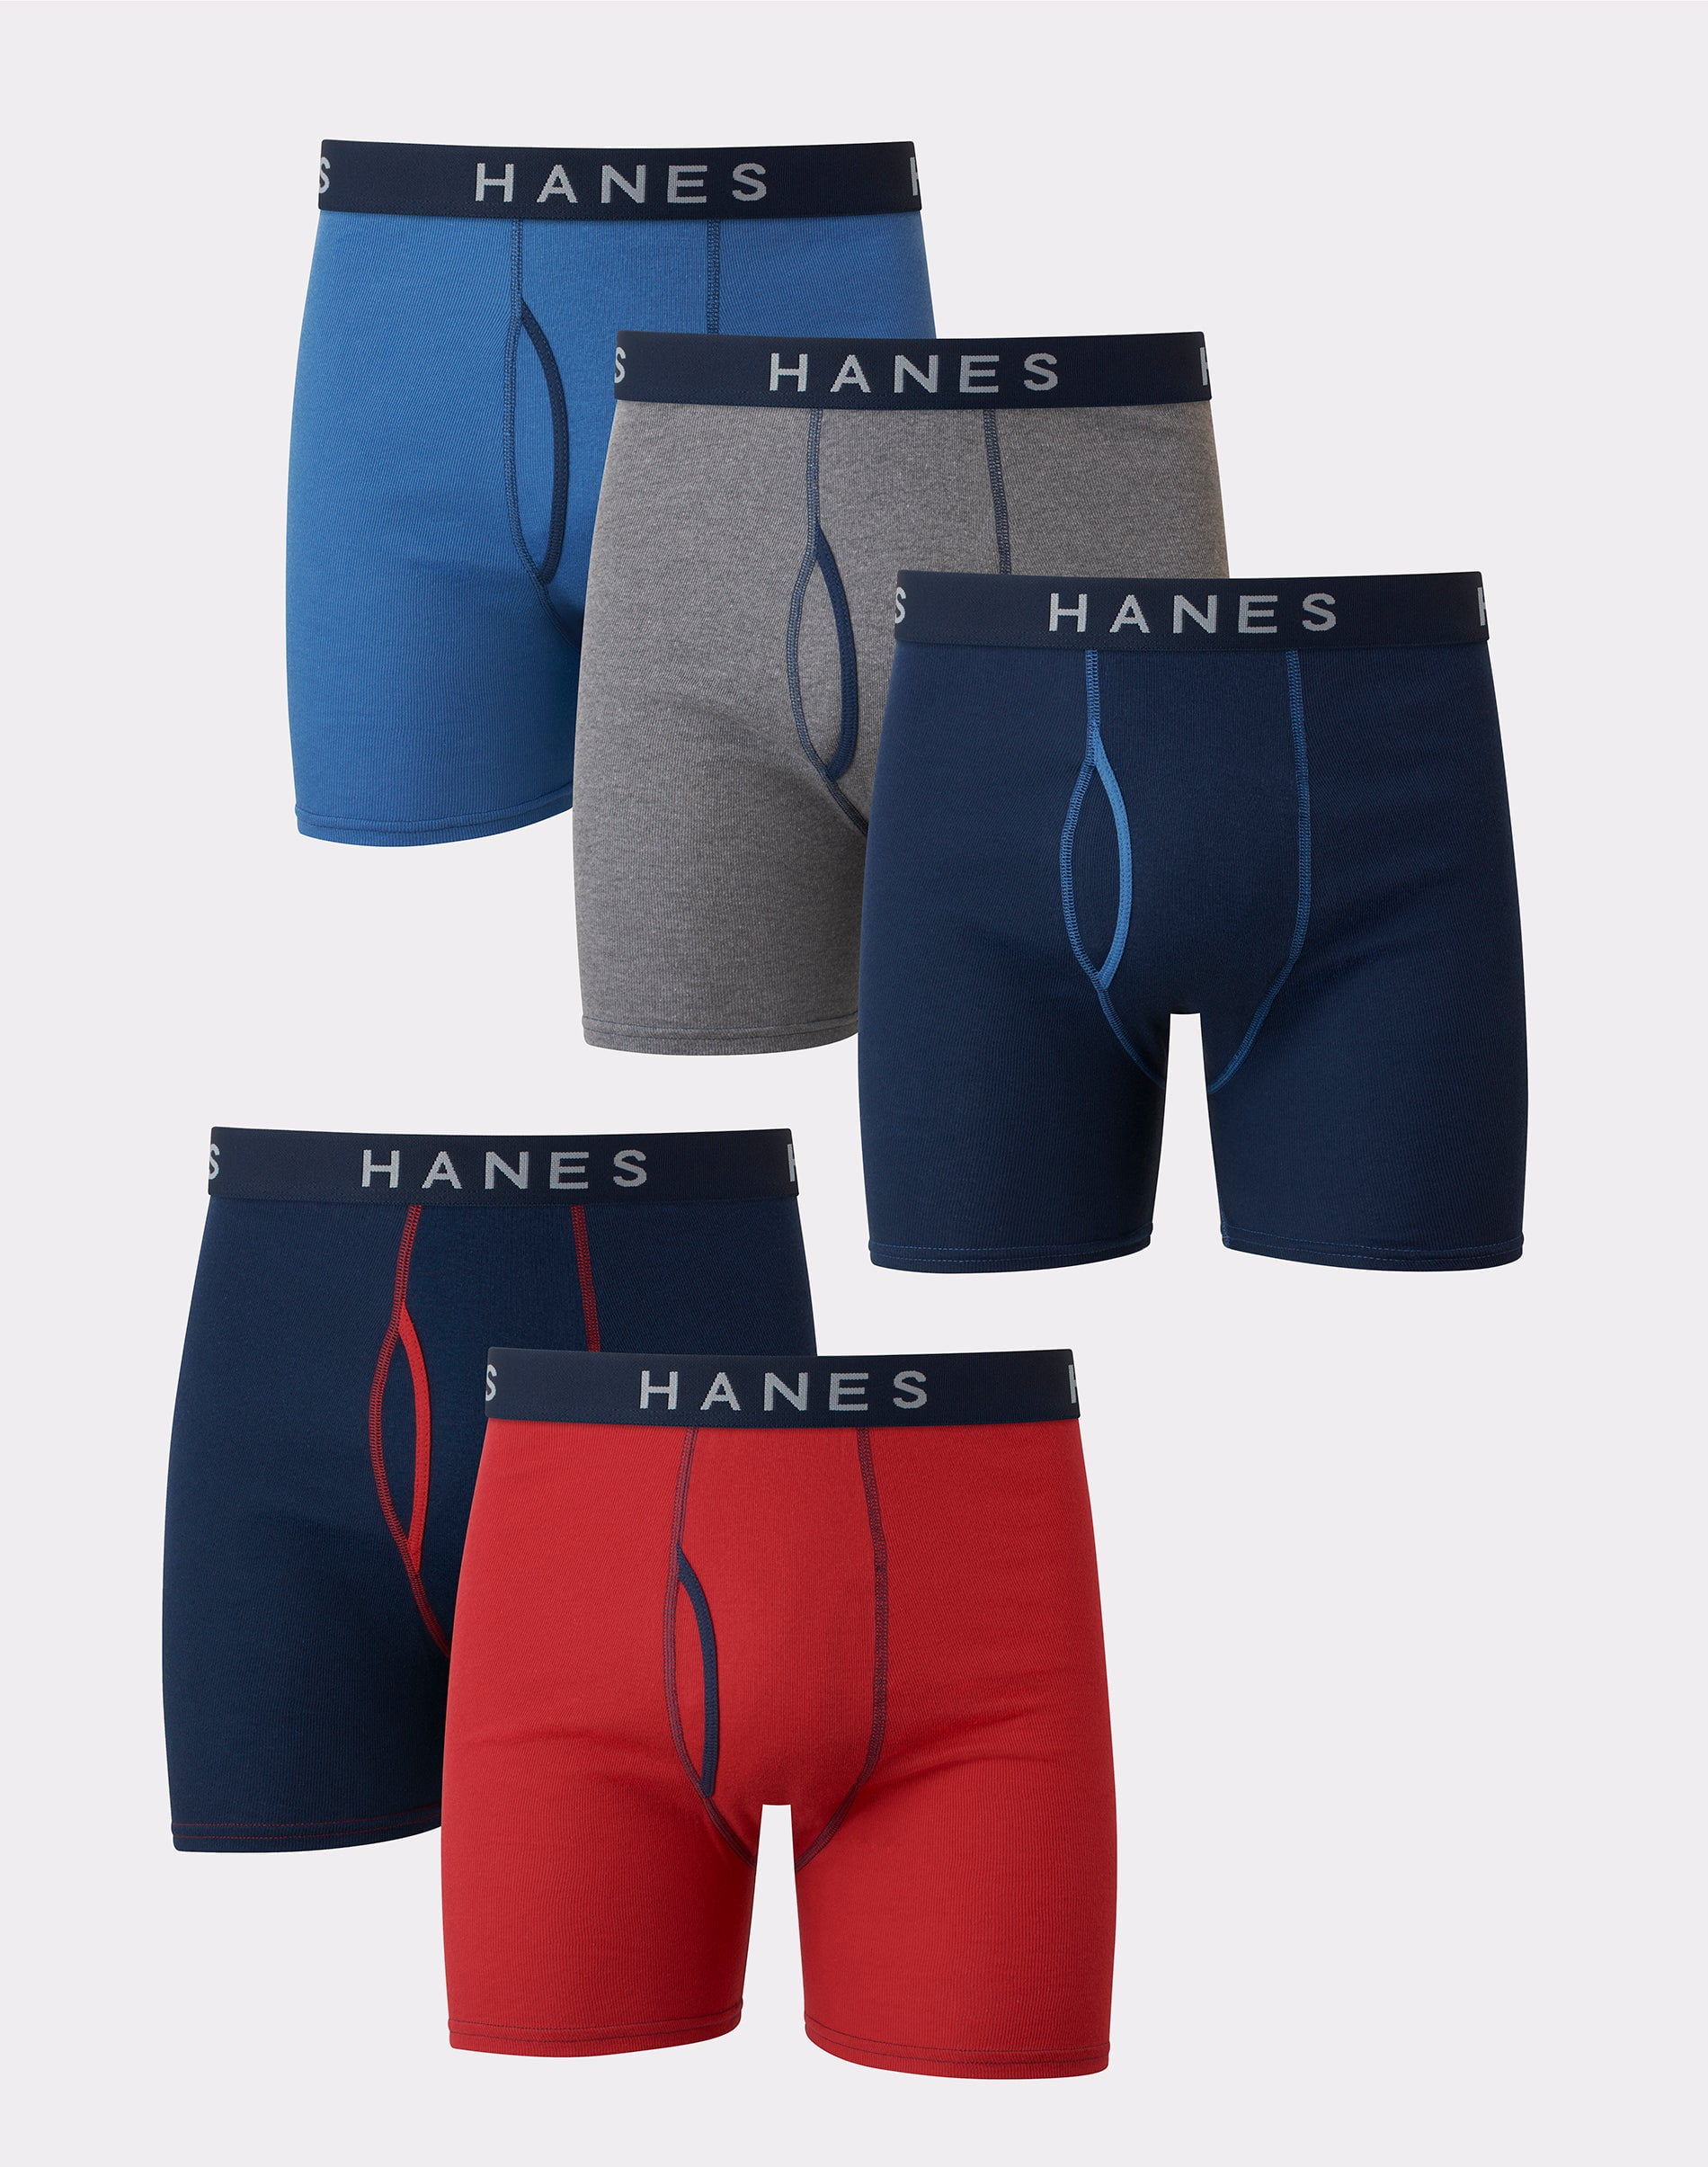 Hanes Ultimate Men's Boxer Briefs, Ringer Style, 5-Pack Assorted 2XL ...